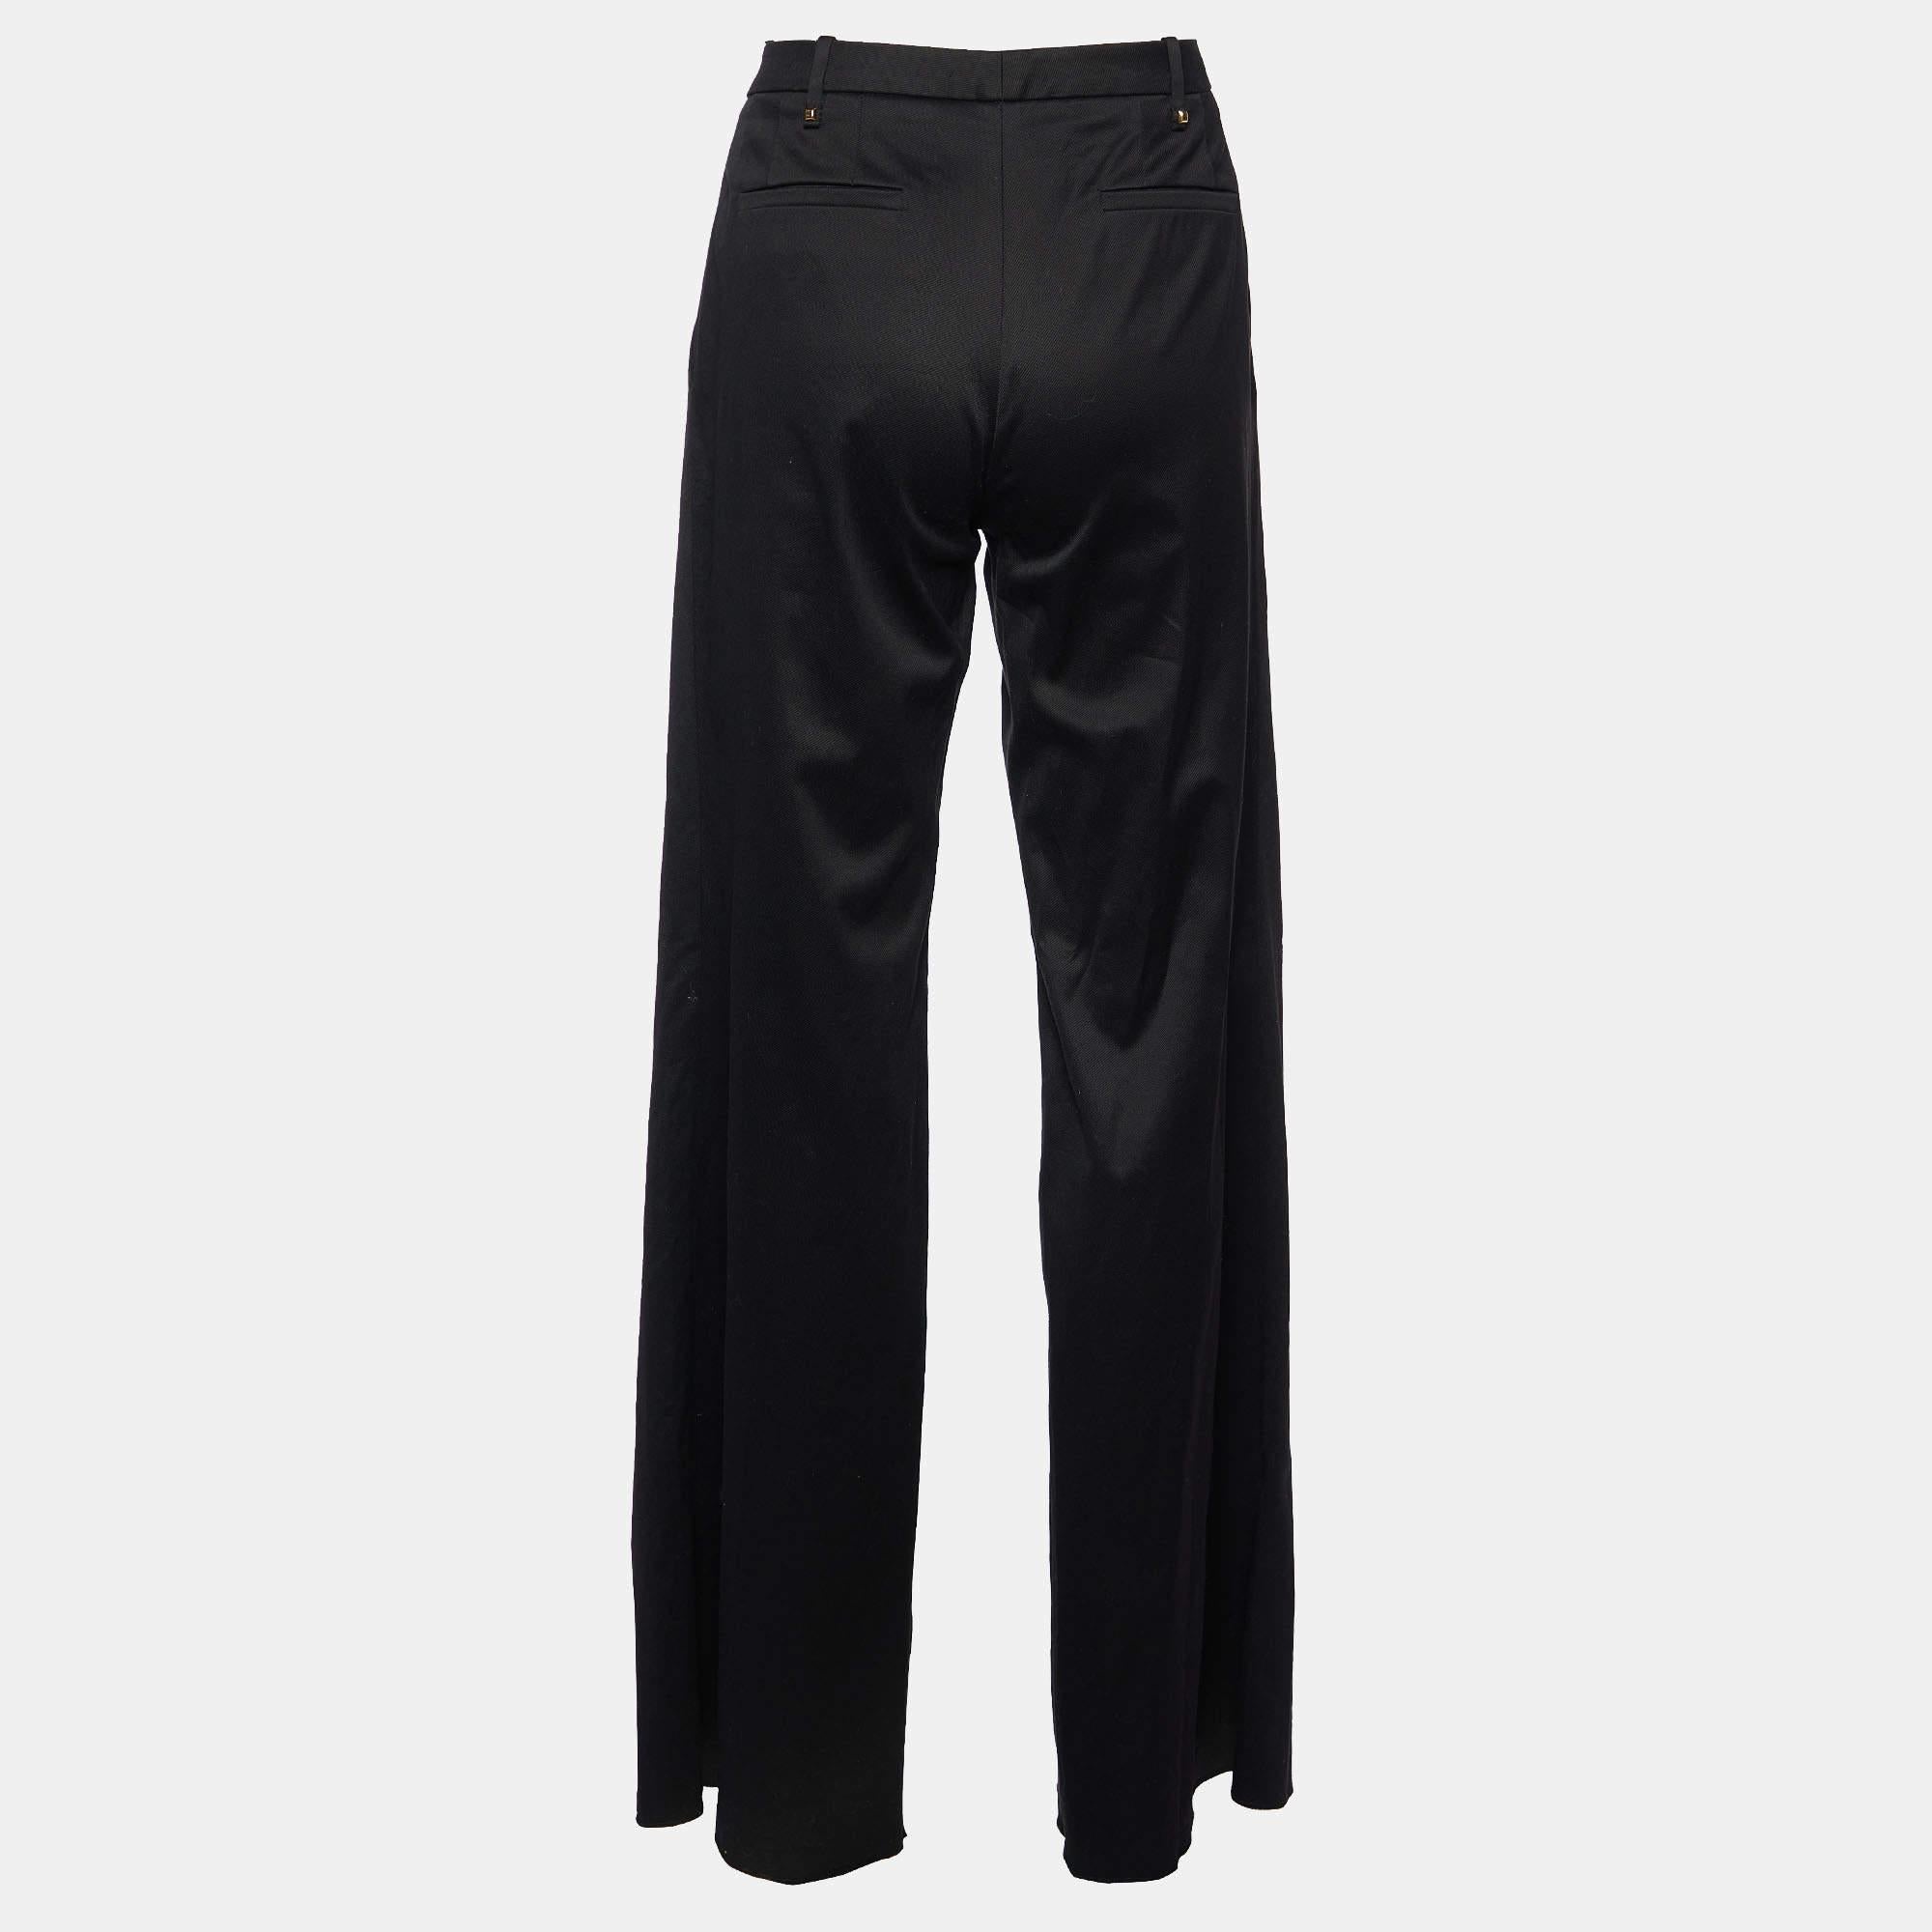 Enhance your attire with this pair of trousers. Designed into a superb silhouette and fit, this pair of trousers will definitely make you look elegant.

